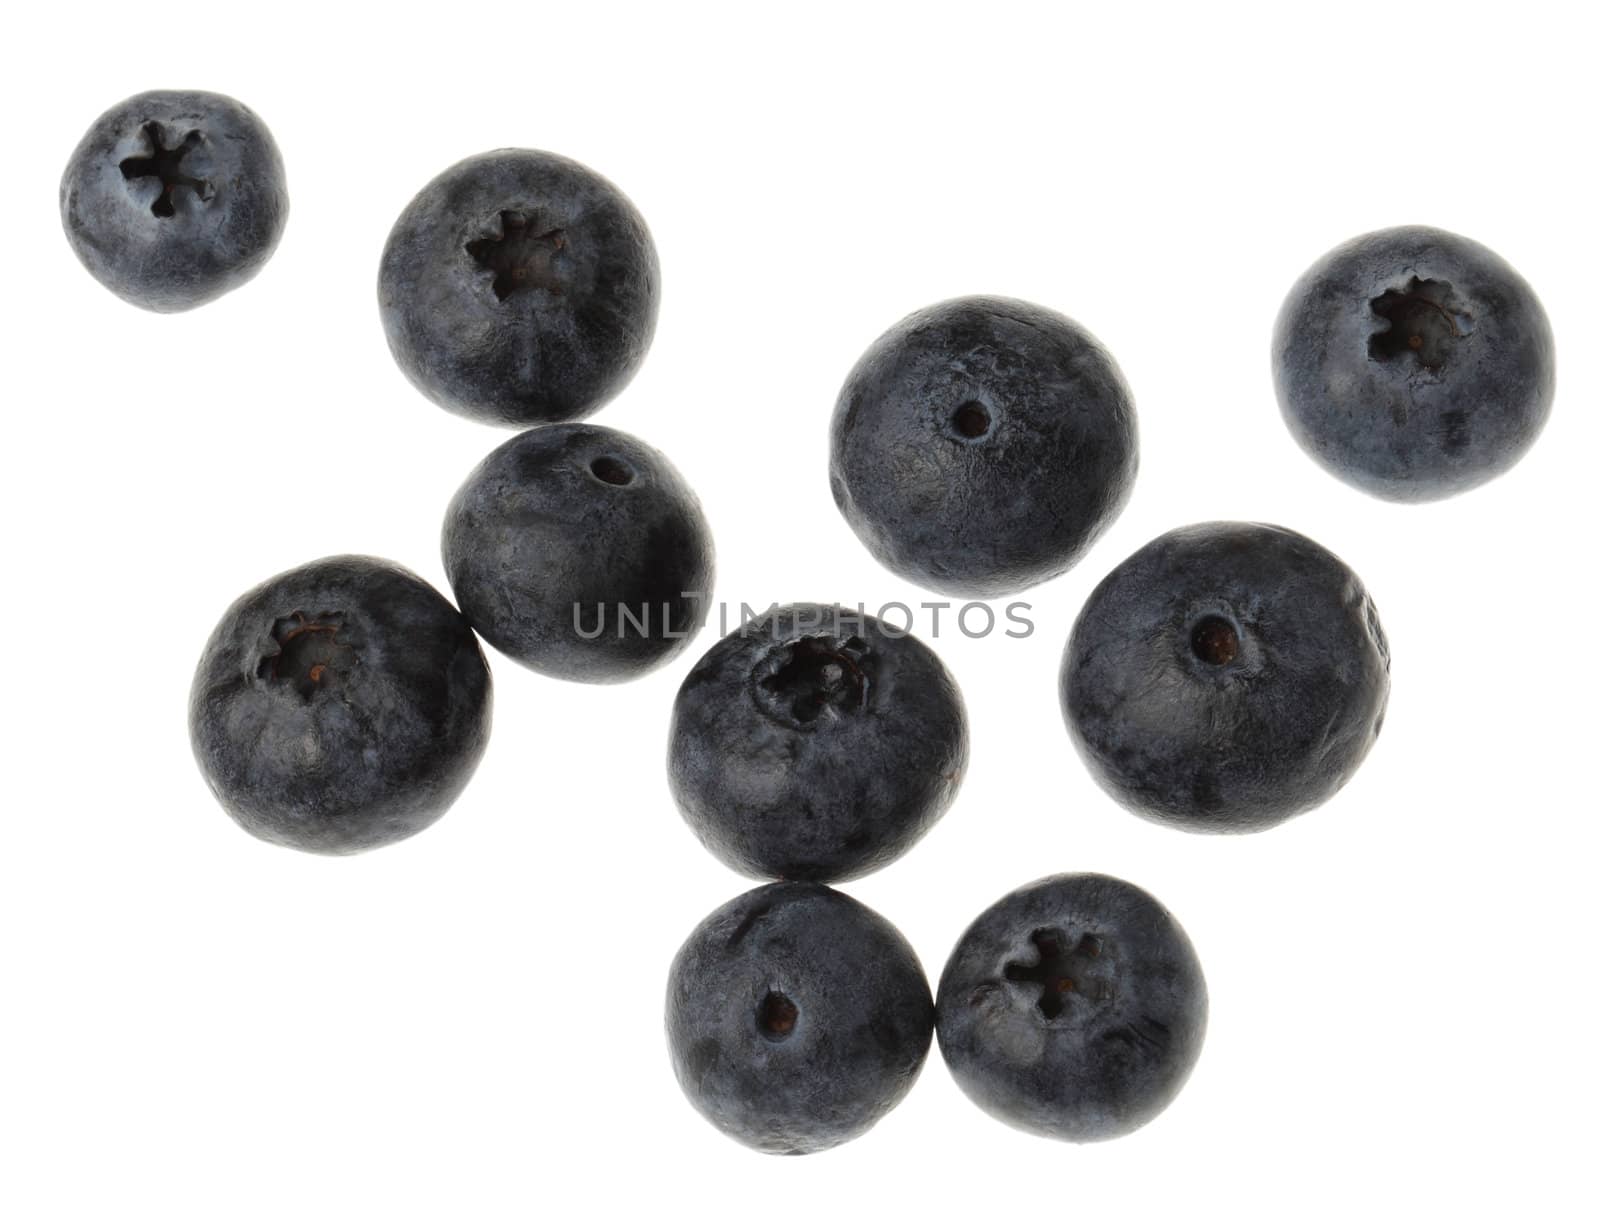 Upper view of blueberries against a white background.